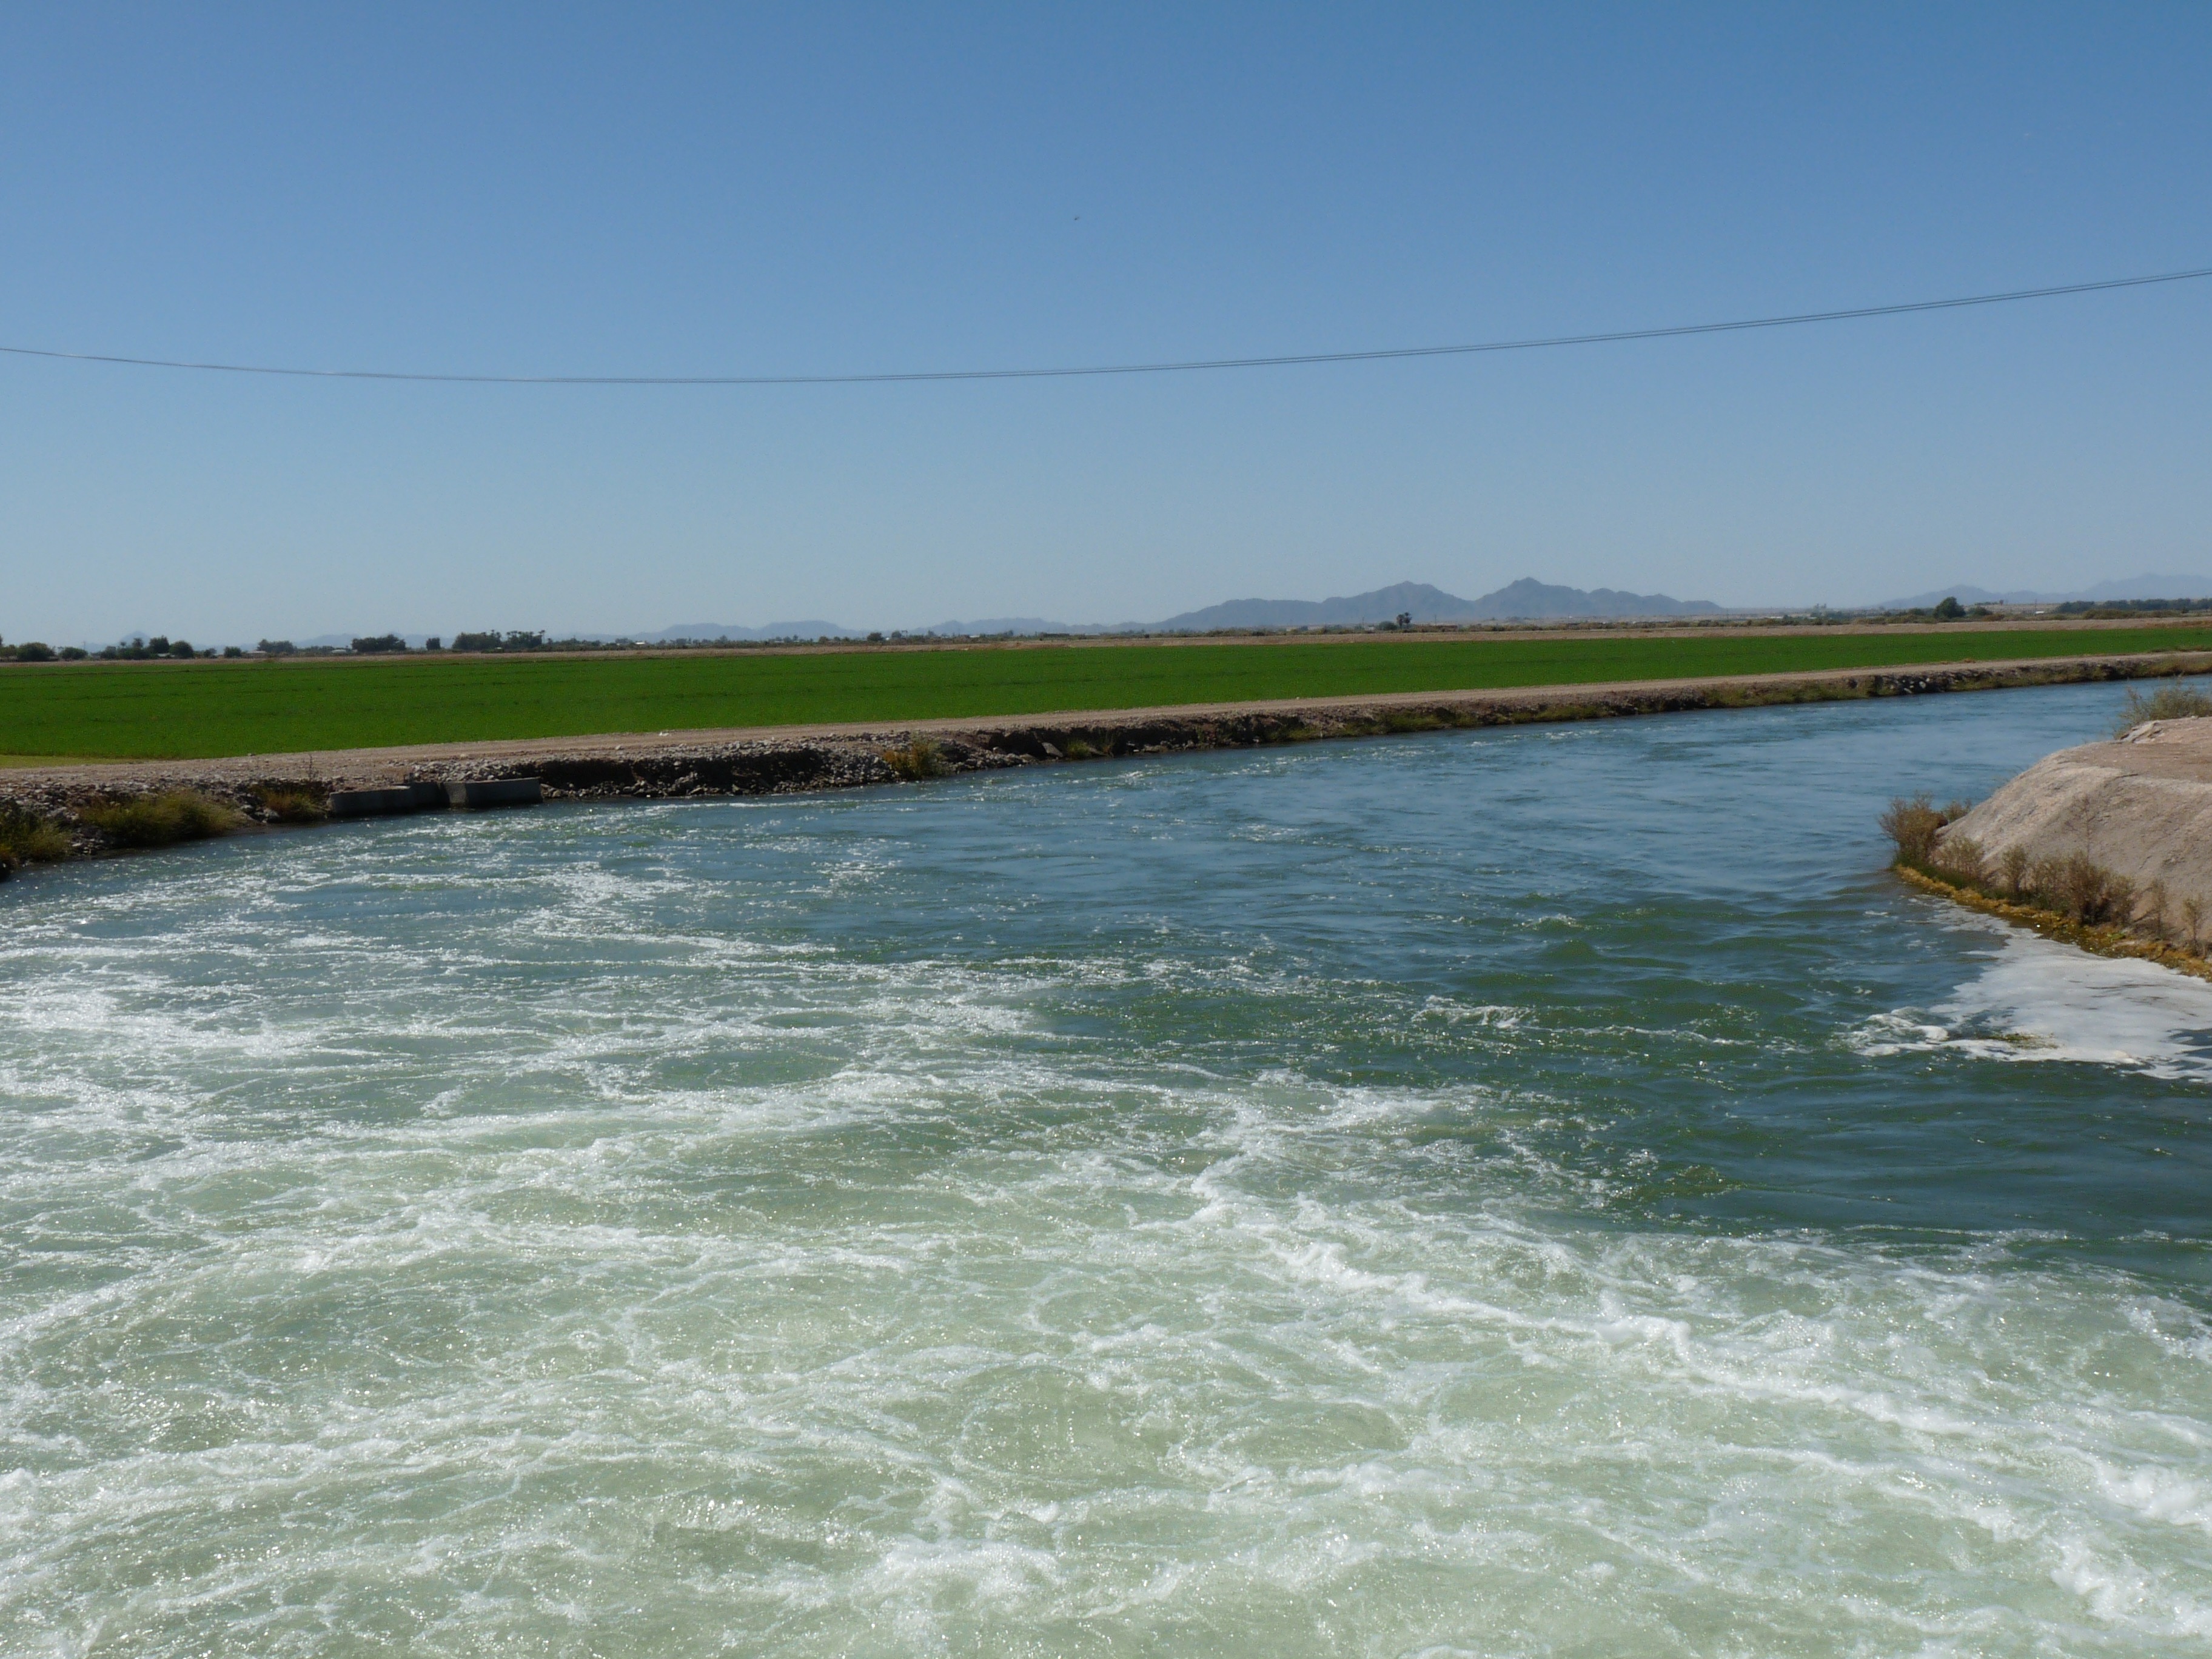 California Water Conveyance or irrigation